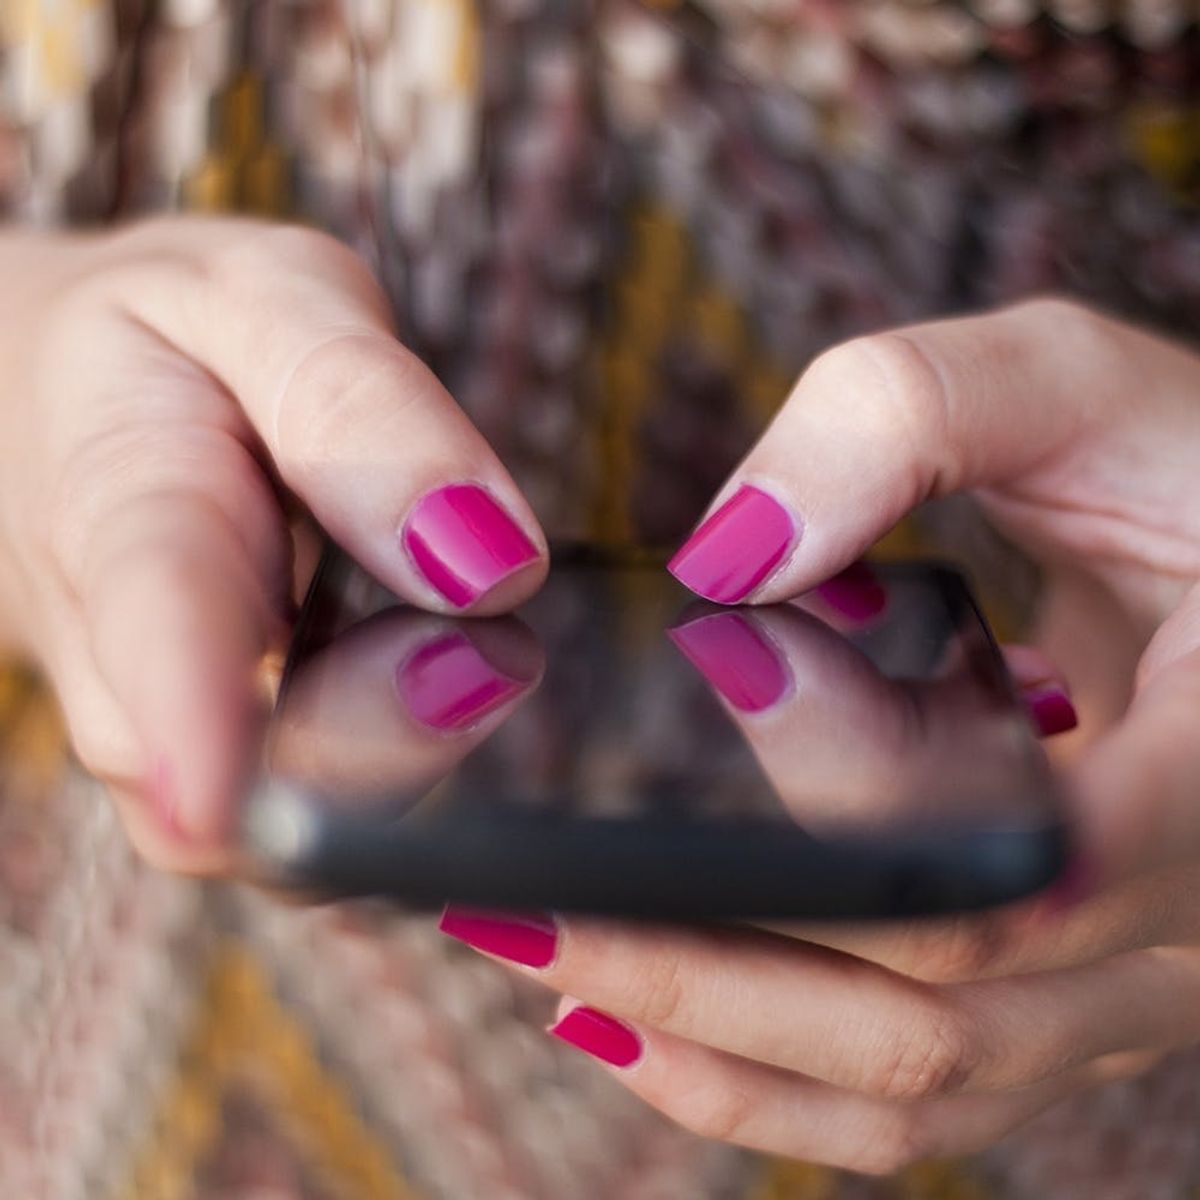 3 House Rules to Spend More Time With People and Less With Your Phone